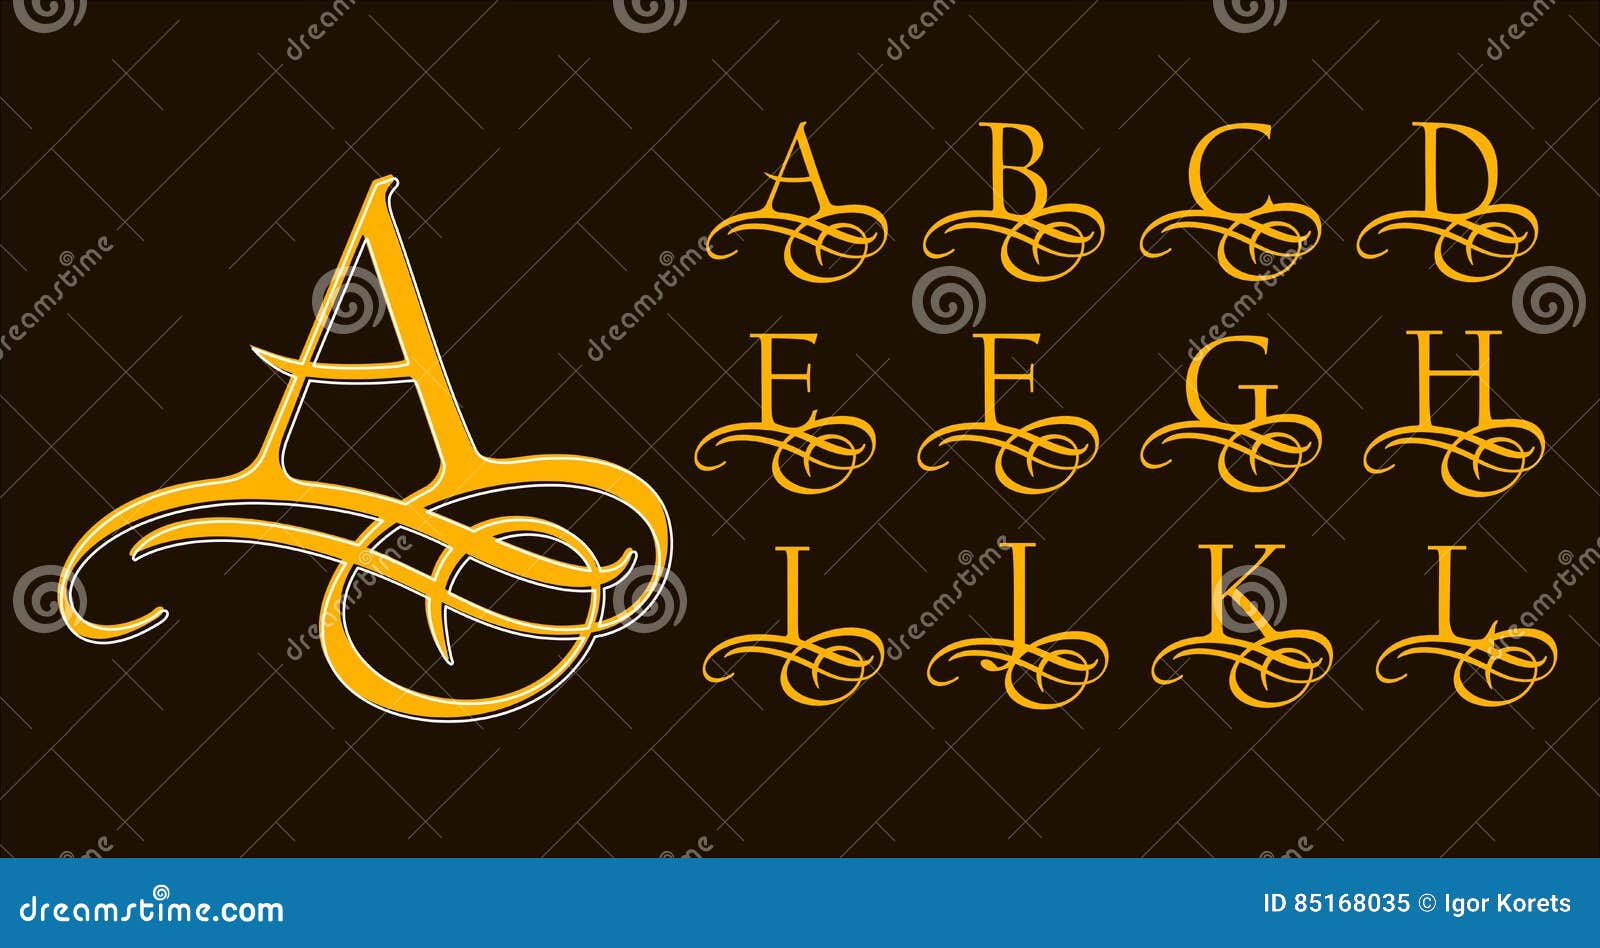 vintage set 1. calligraphic capital letters with curls for monograms and logos. beautiful filigree font s o